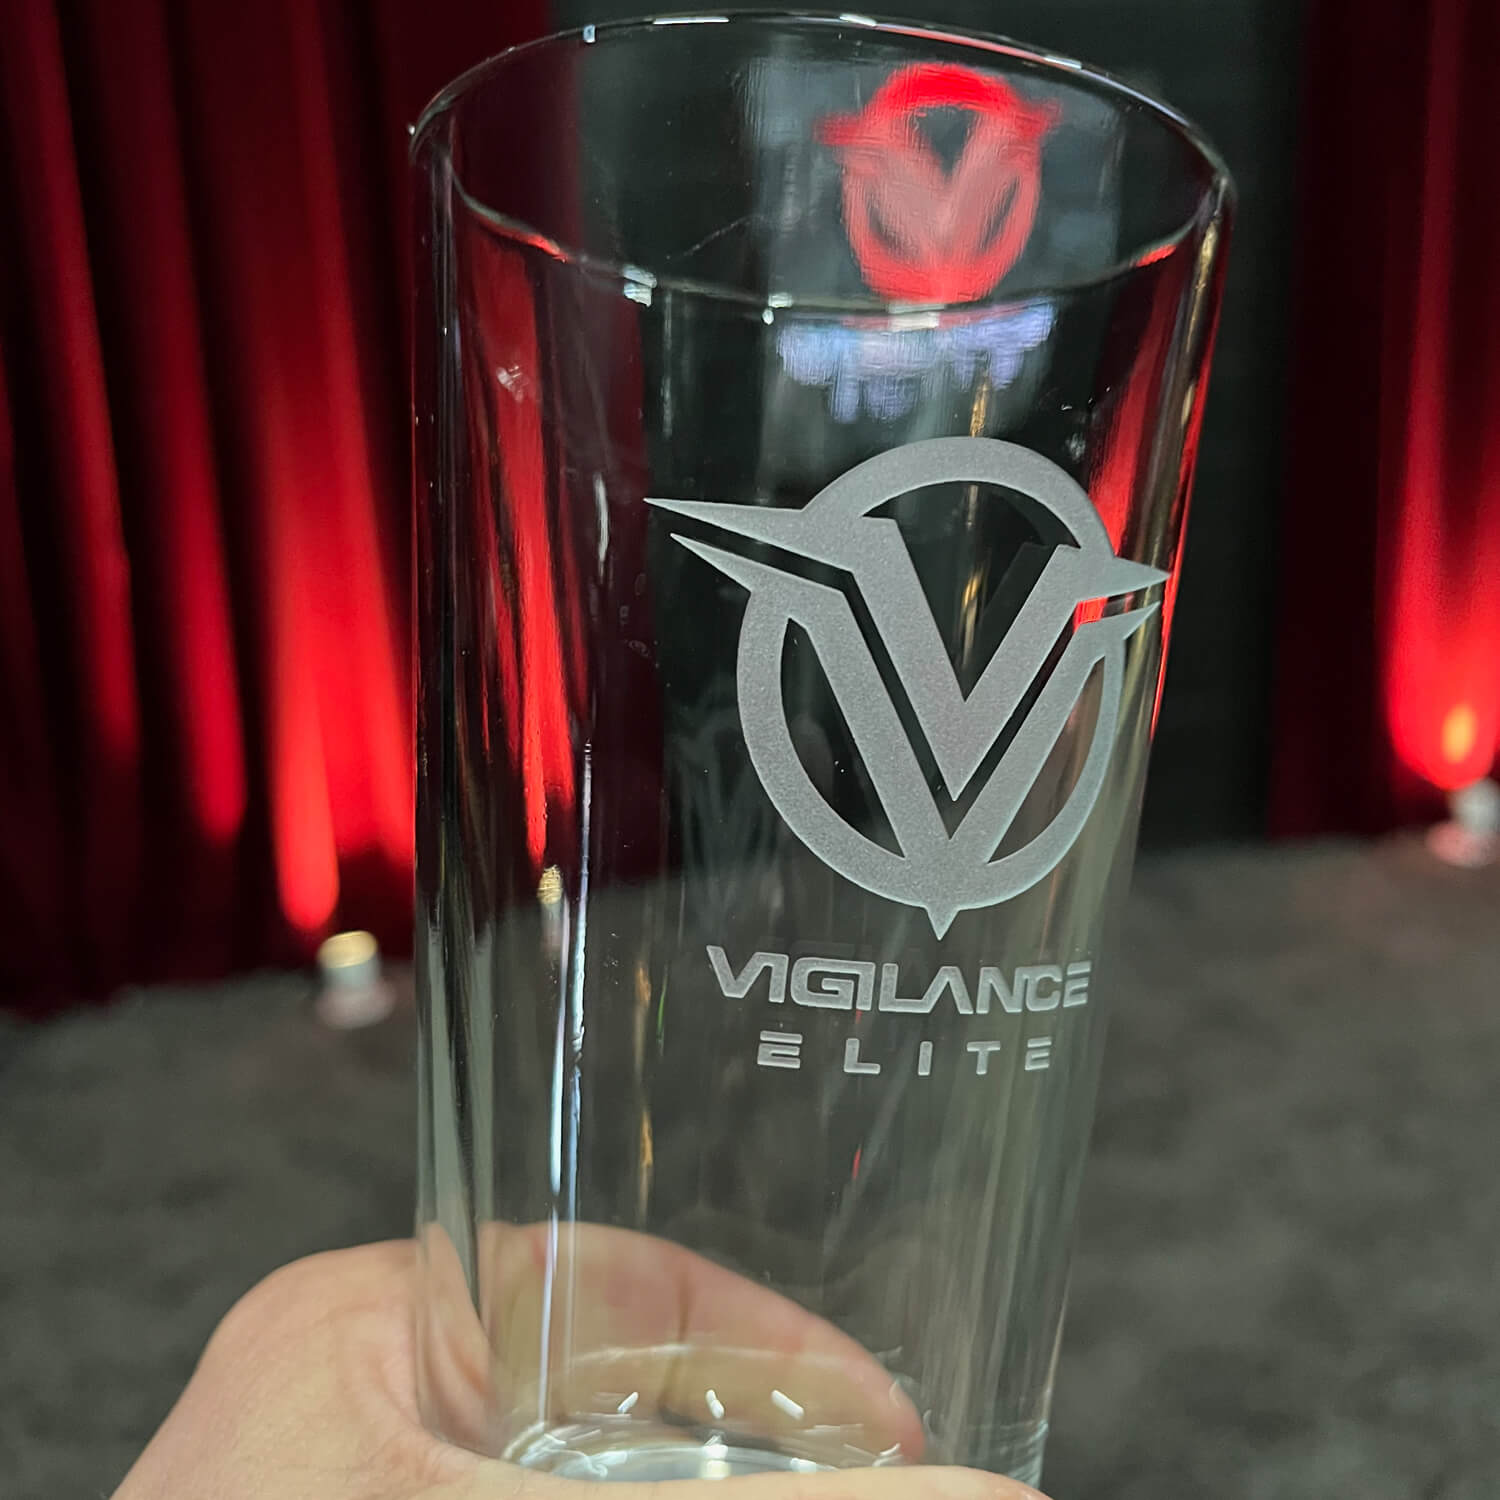 Shawn holding the new deep etched Vigilance Elite Pint Glass